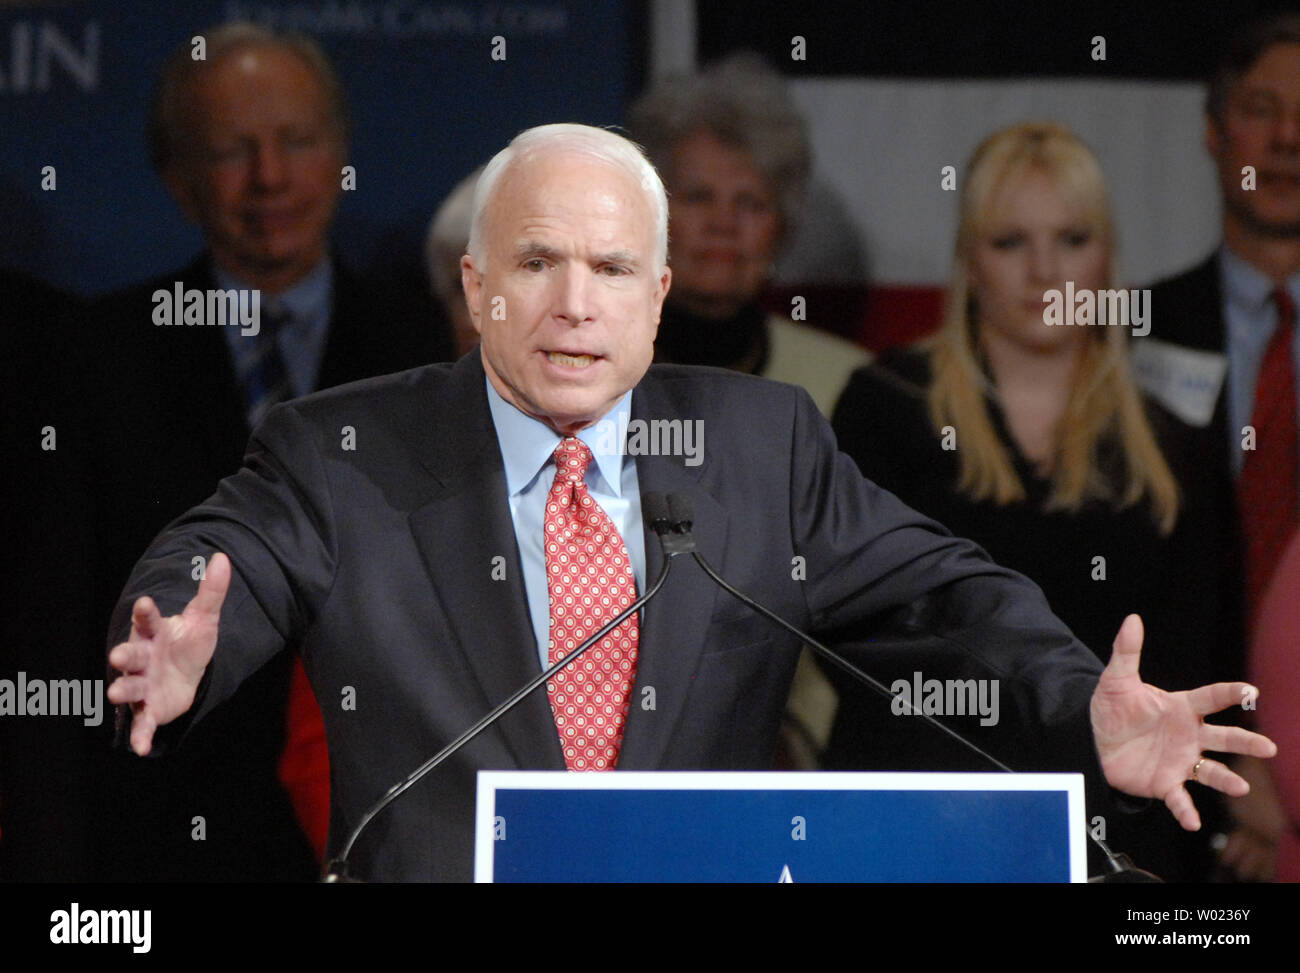 Sen. John McCain (R-AZ) speaks at a rally on Super Tuesday at the Arizona Biltmore Resort in Phoenix, Arizona on February 5, 2008. McCain is the projected leader in the race for the GOP nomination as 24 U.S. states vote in the primary election. (UPI Photo/Alexis C. Glenn) Stock Photo